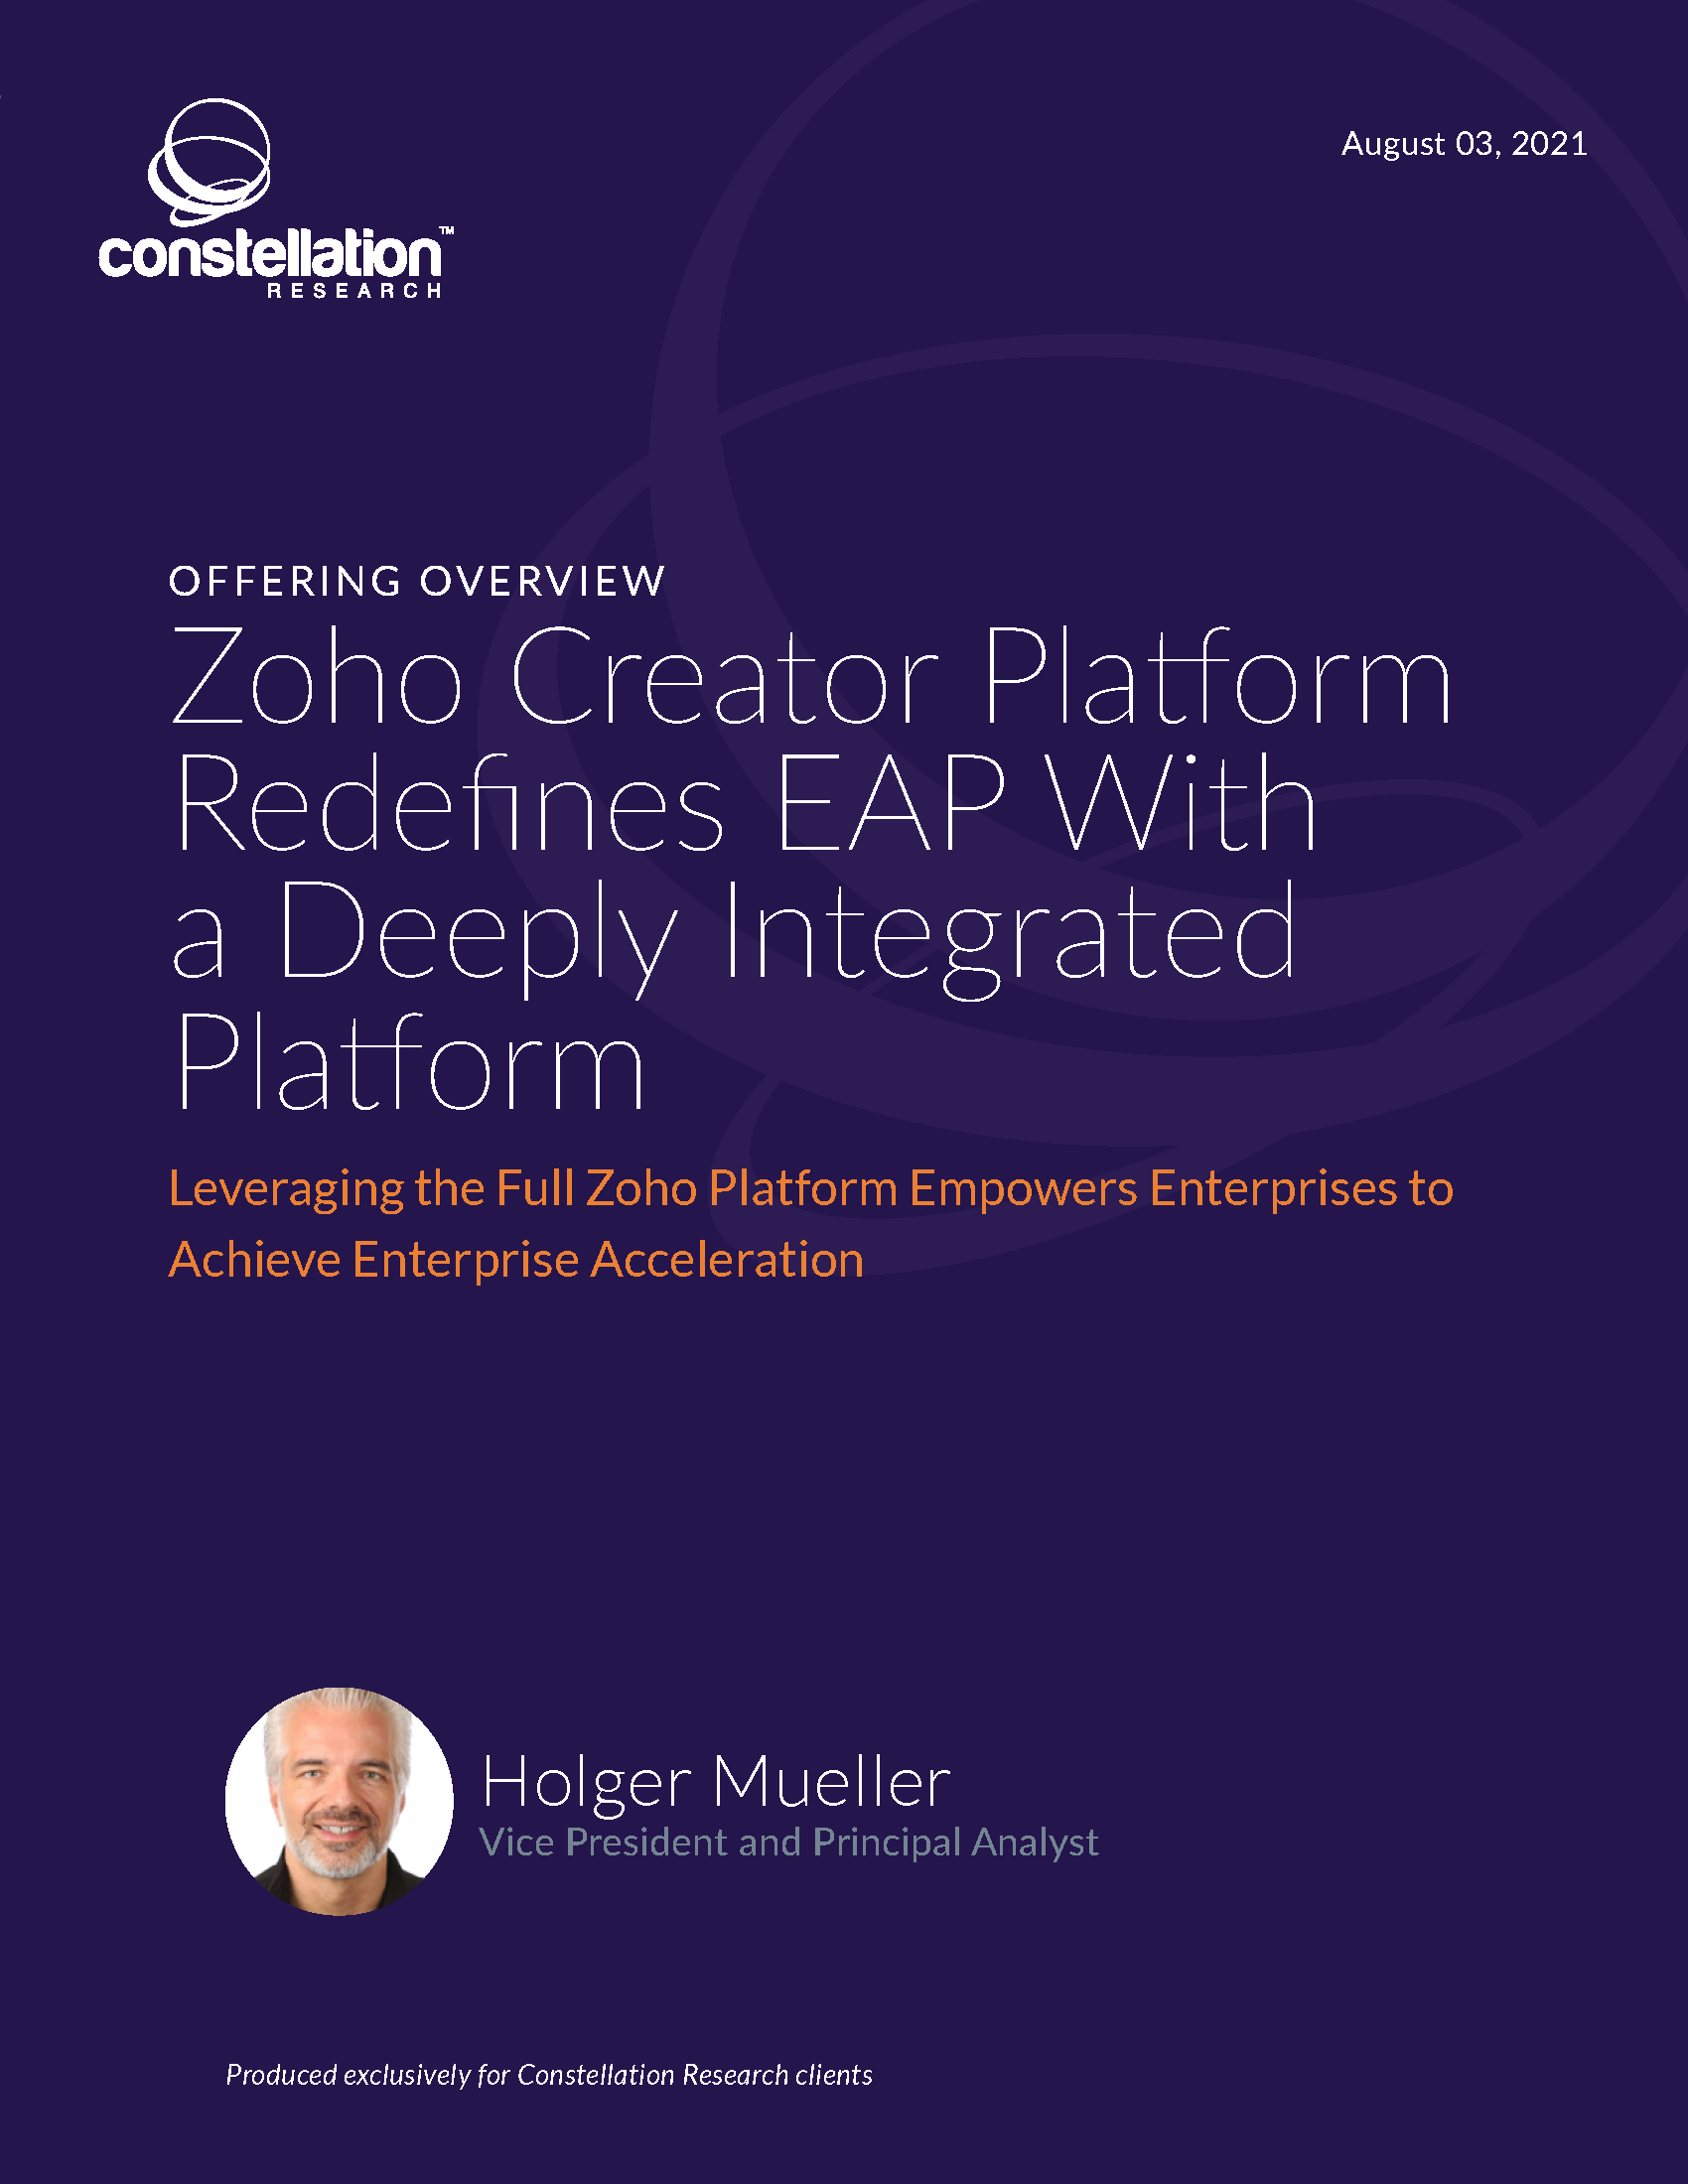 Zoho Creator Platform Redefines EAP With a Deeply Integrated Platform